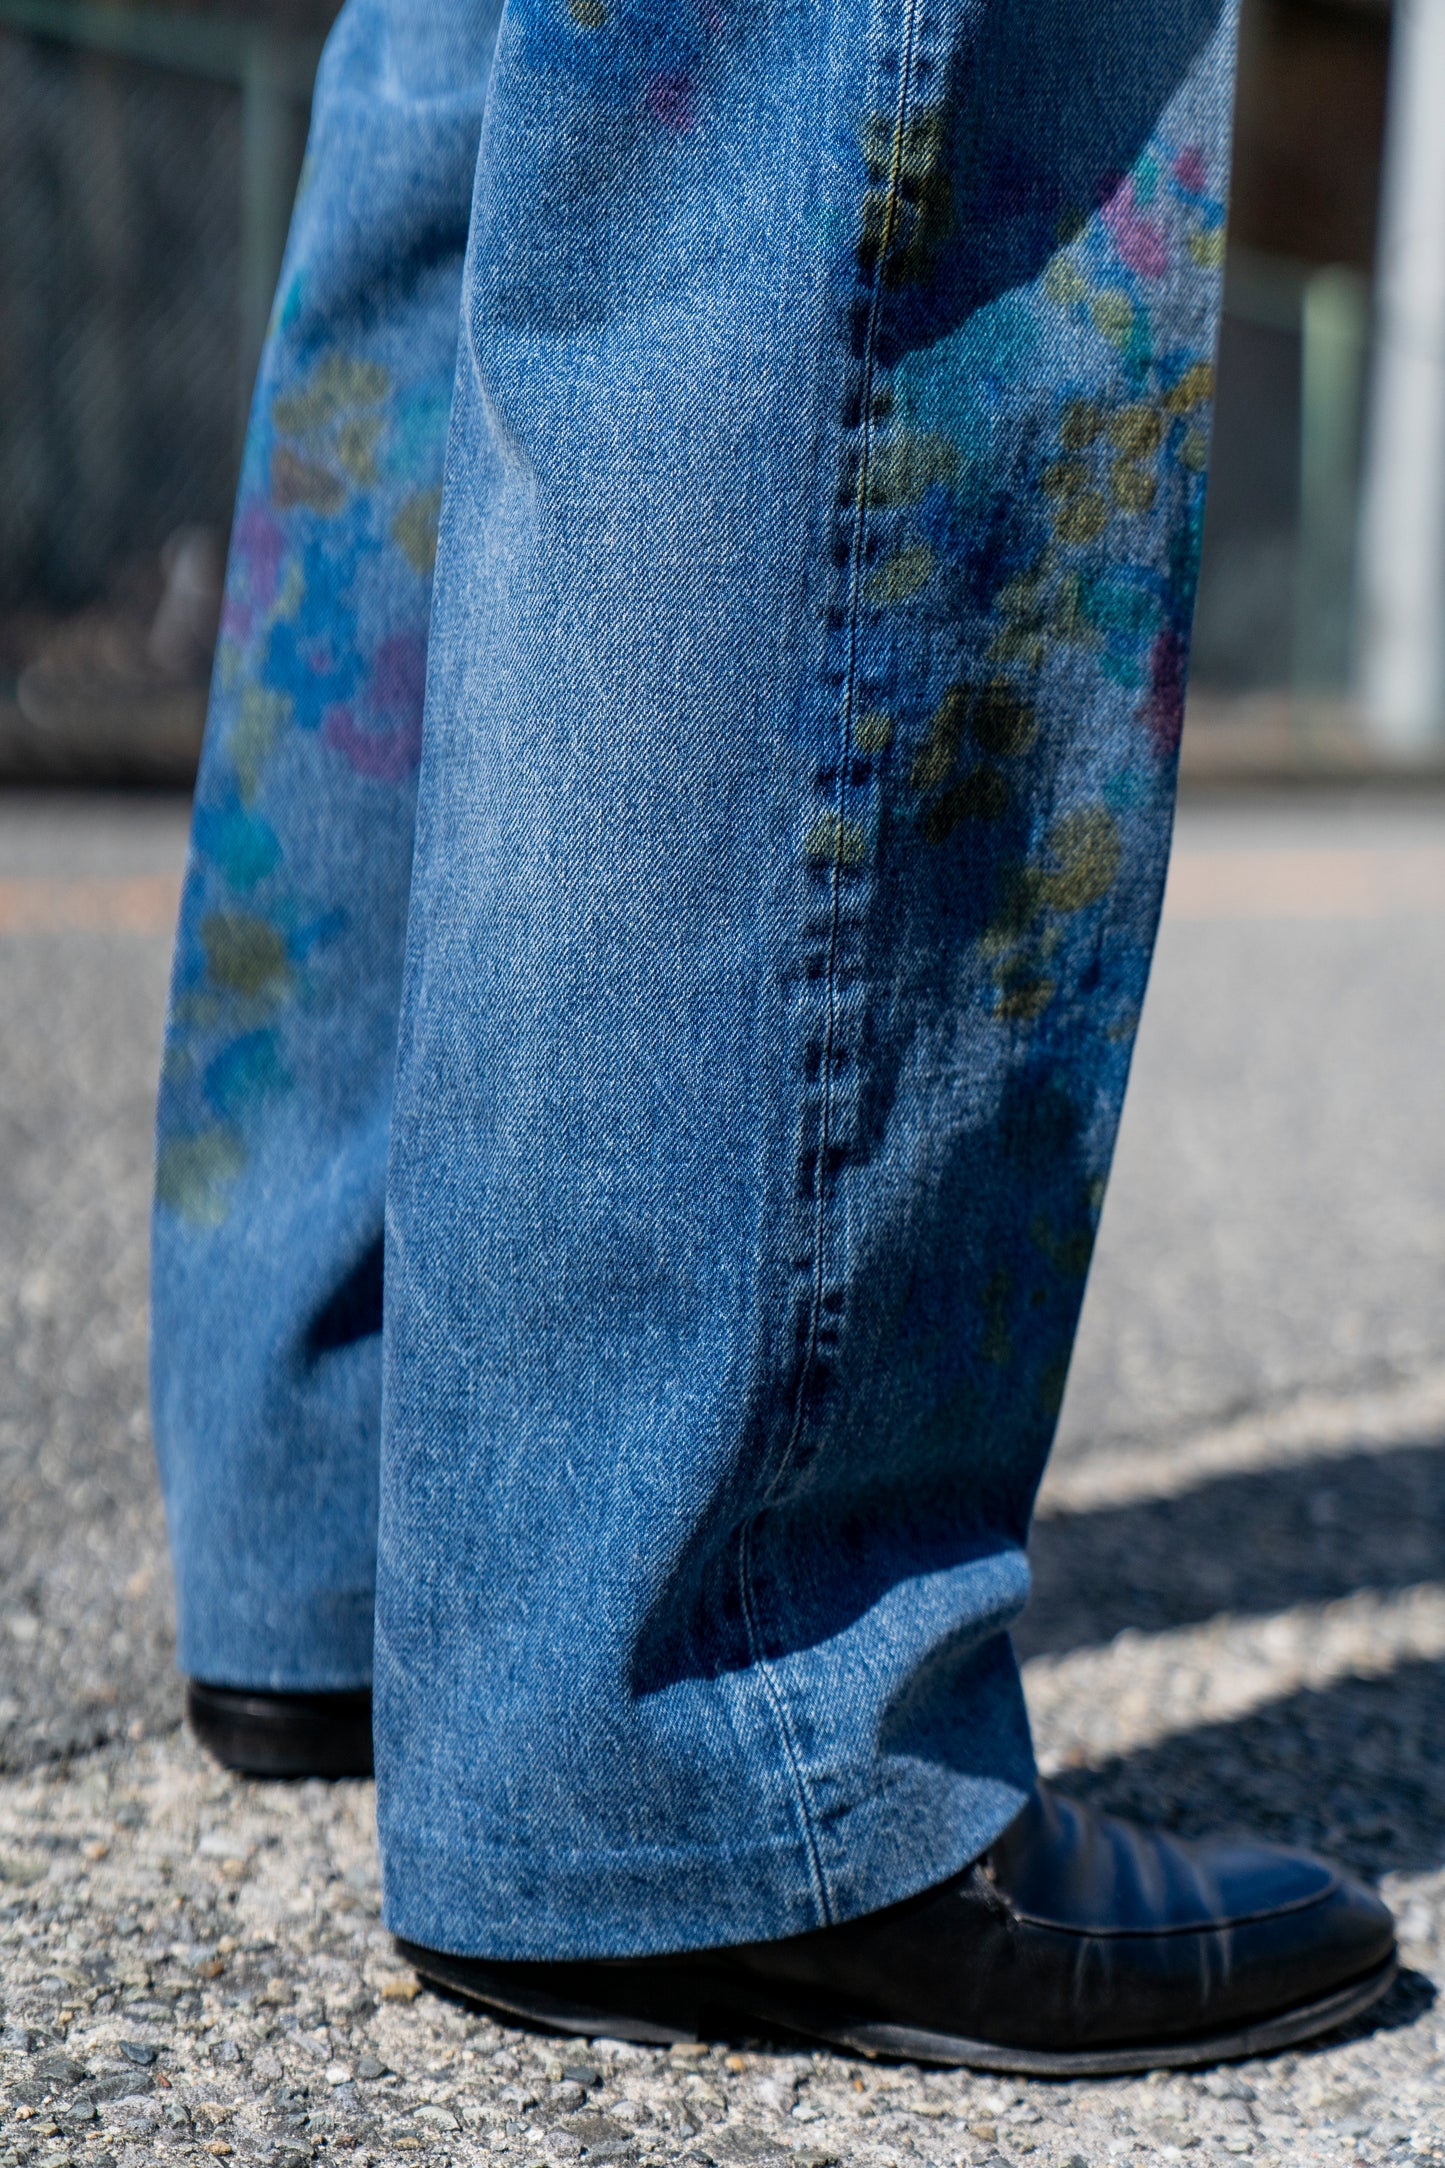 THE JEAN TROUSERS